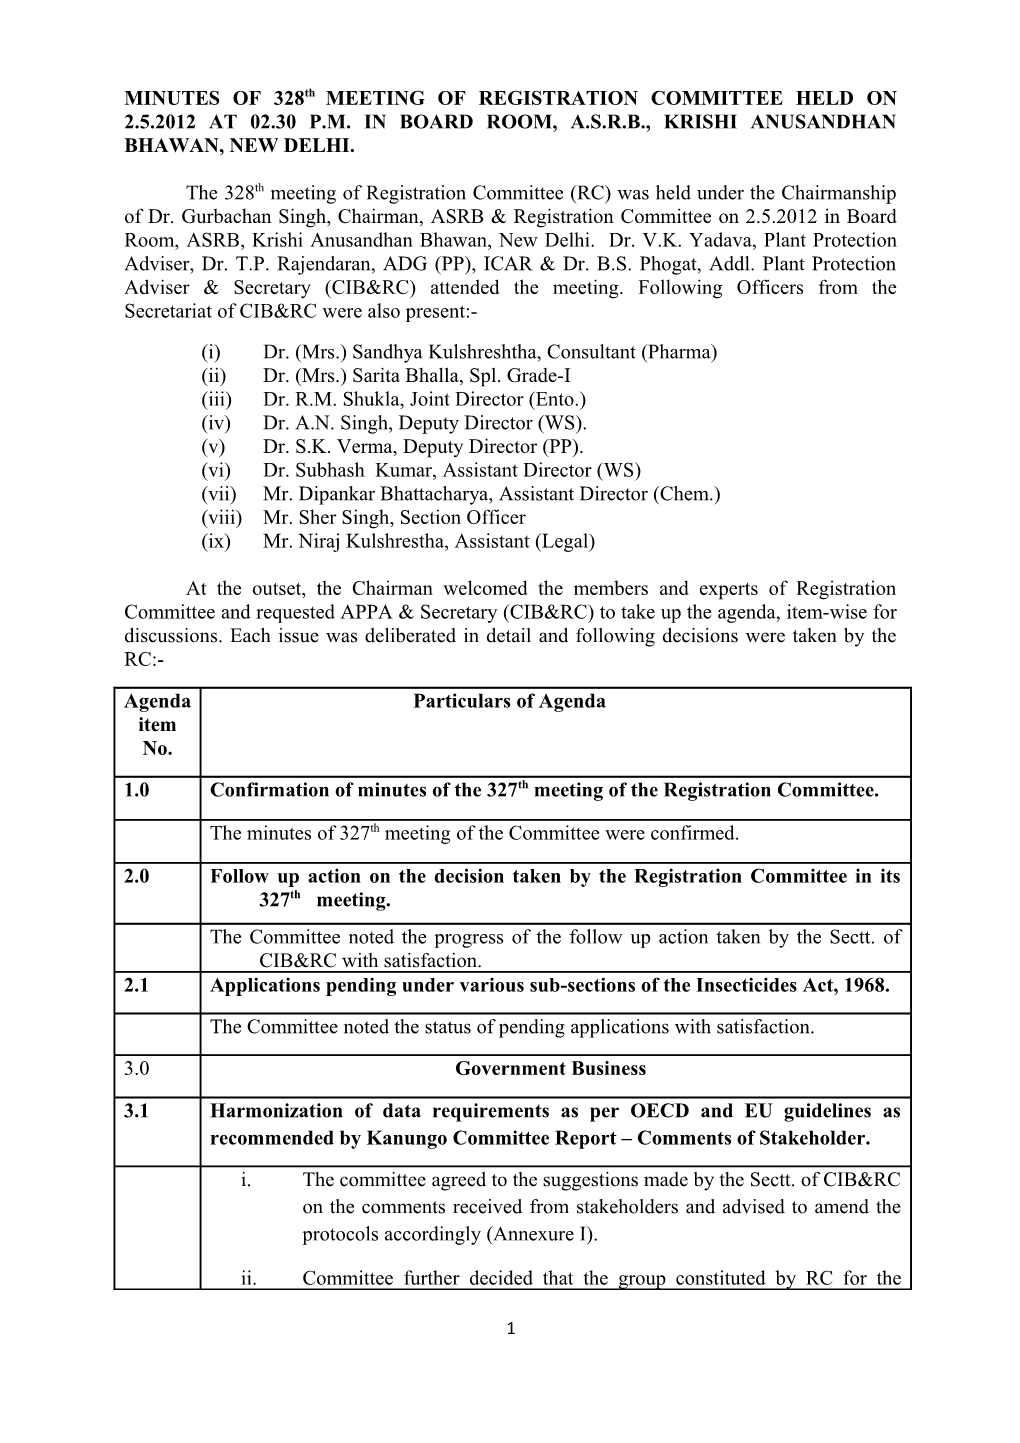 MINUTES of 328Th MEETING of REGISTRATION COMMITTEE HELD on 2.5.2012 at 02.30 P.M. in BOARD